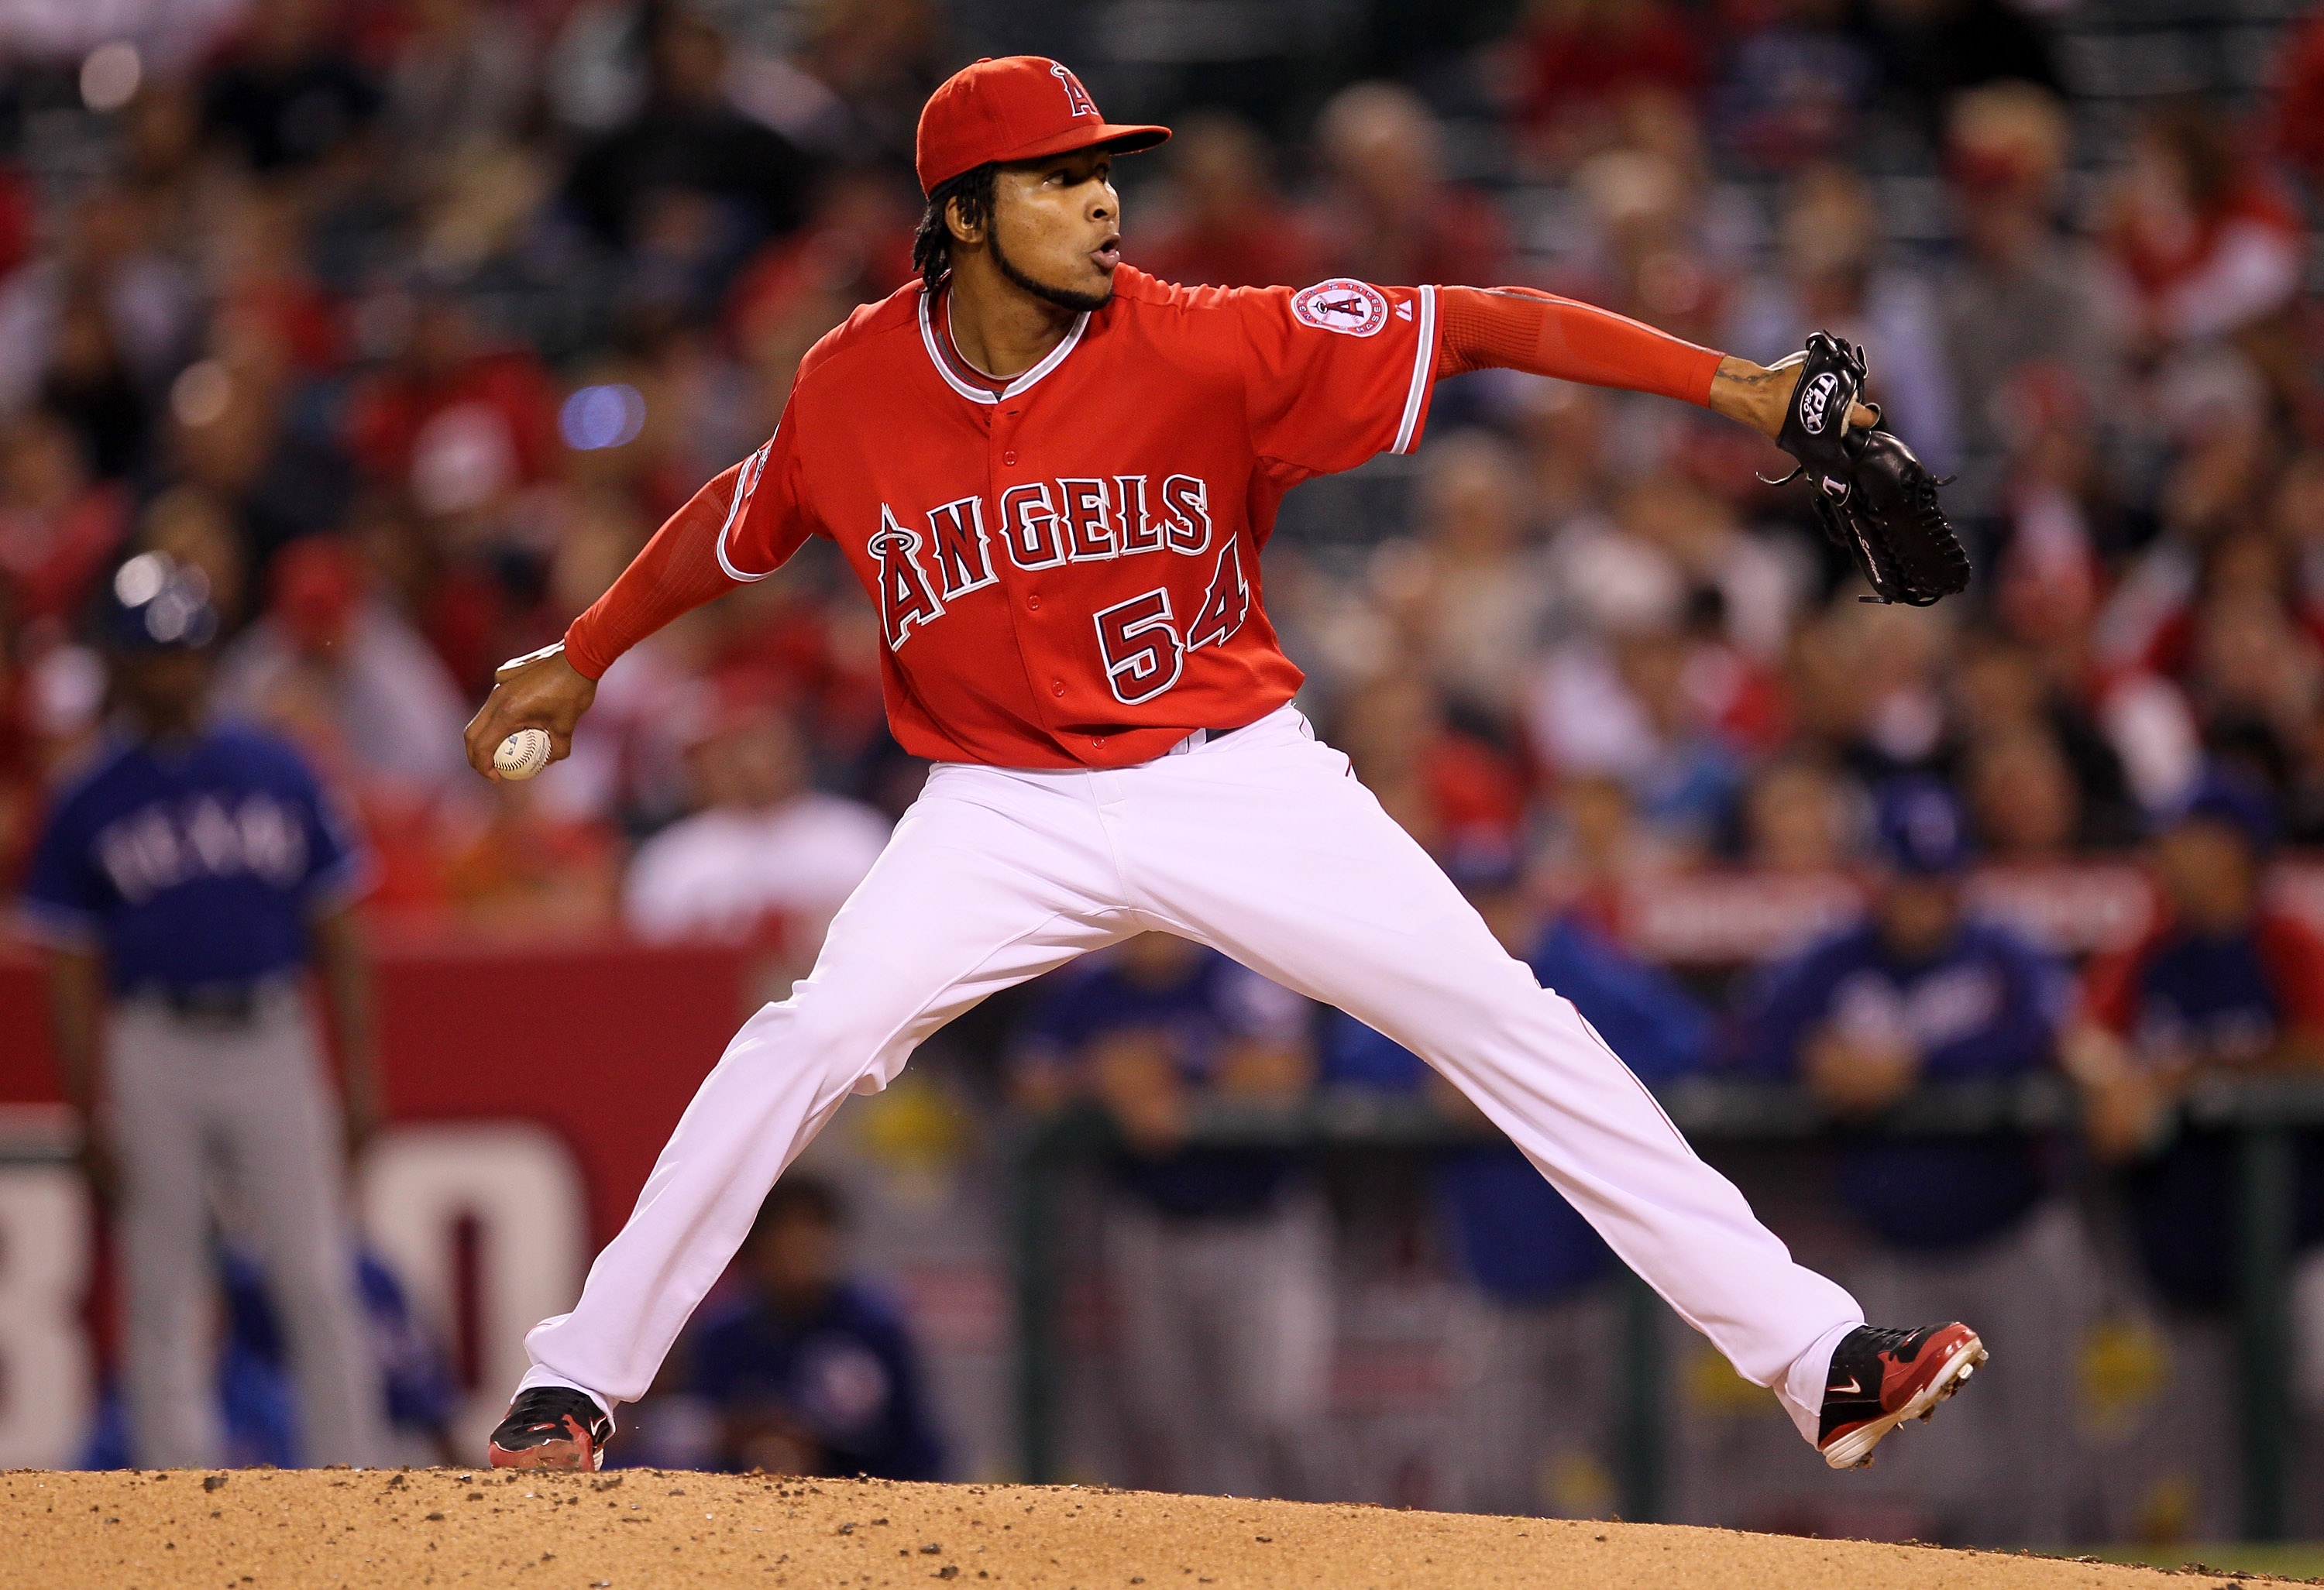 ANAHEIM, CA - SEPTEMBER 21:  Ervin Santana #54 of the Los Angeles Angels of Anaheim throws a pitch against the Texas Rangers on September 21, 2010 at Angel Stadium in Anaheim, California.  (Photo by Stephen Dunn/Getty Images)